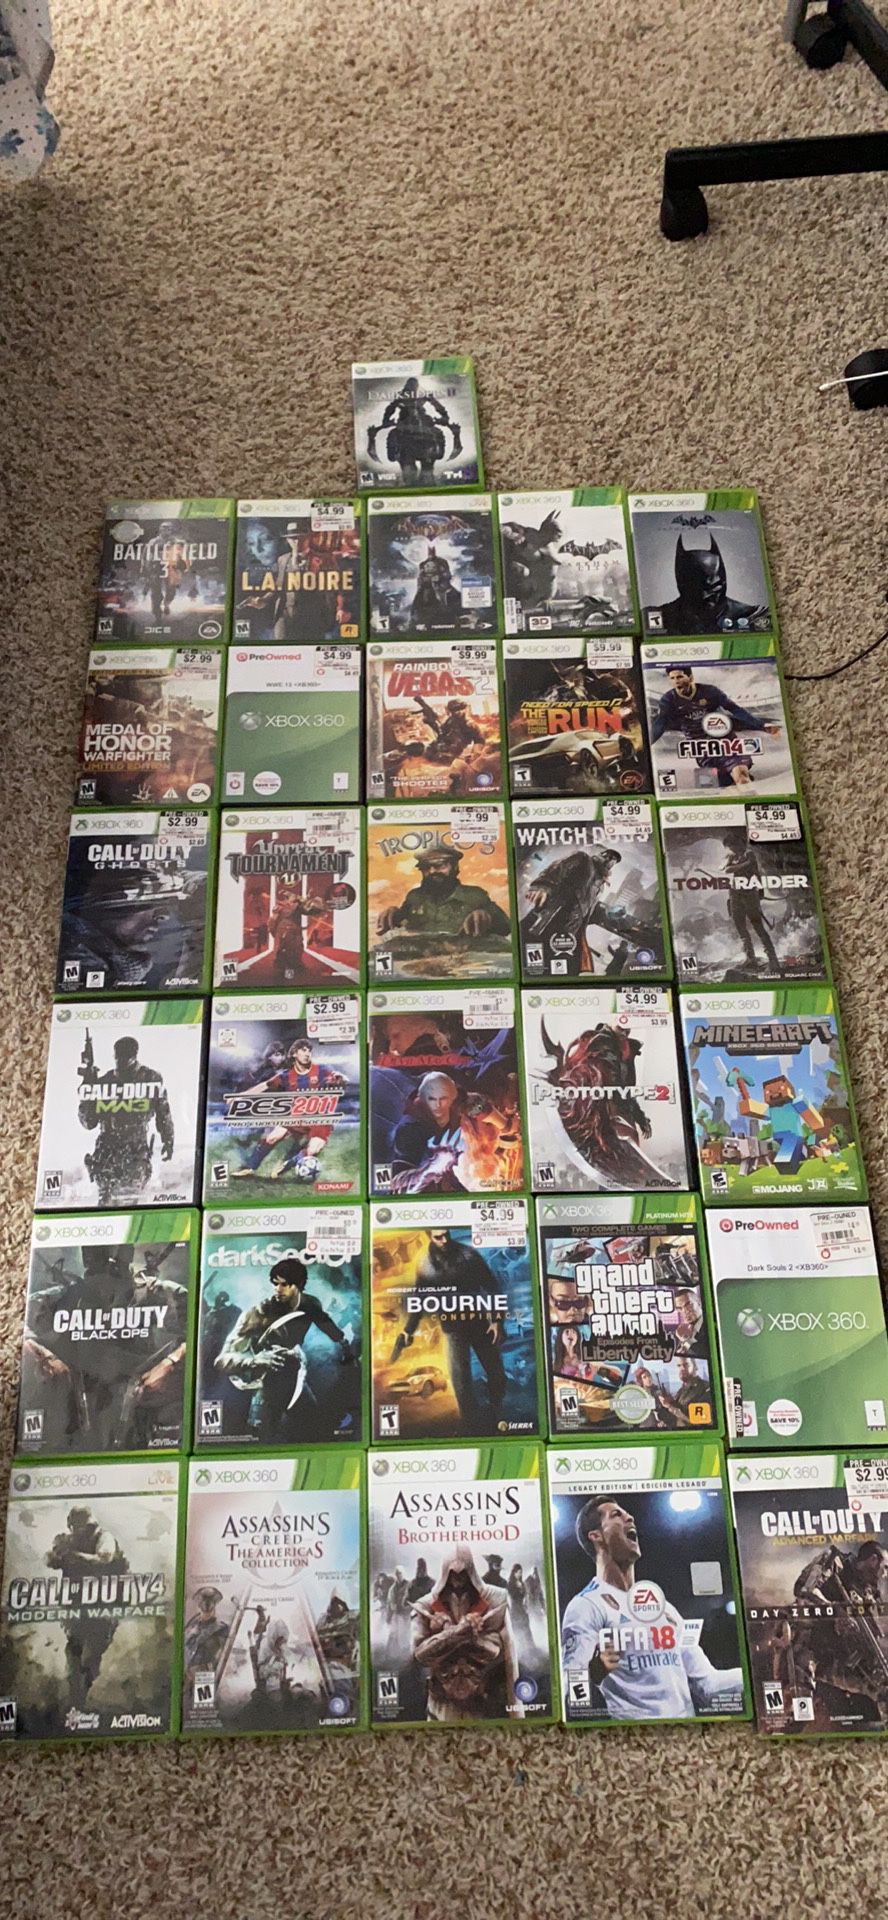 Xbox 360 and 33 games 32 game disc and one digital game